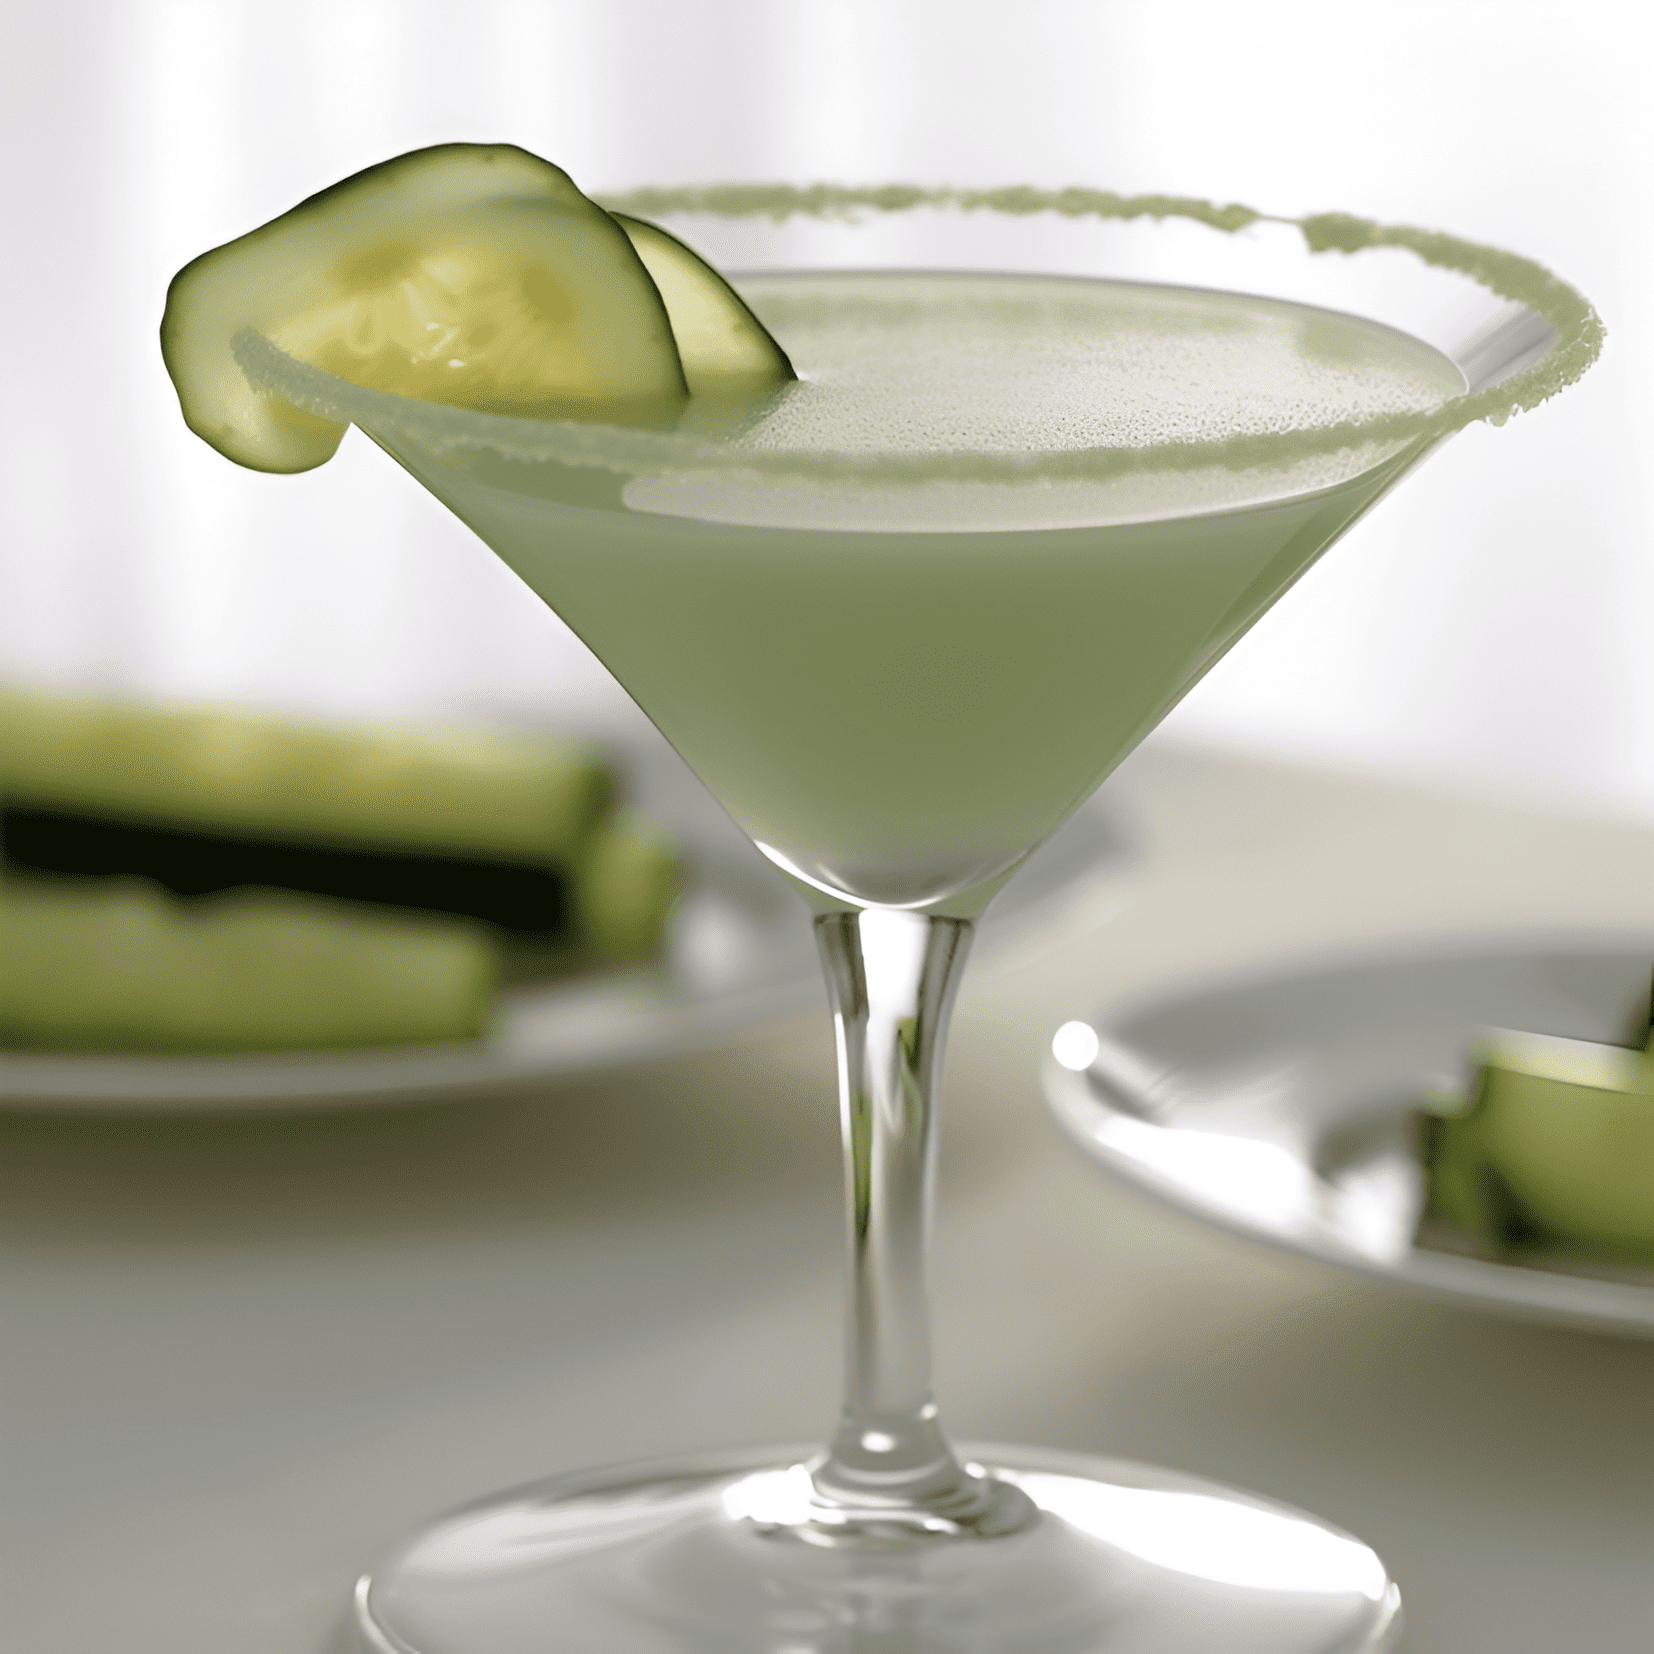 Cucumber Martini Cocktail Recipe - The Cucumber Martini is crisp, clean, and refreshing with a subtle hint of botanicals. It has a light, slightly sweet taste with a smooth, velvety texture. The cucumber adds a cool, fresh flavor that balances the sharpness of the gin and the tanginess of the lemon.